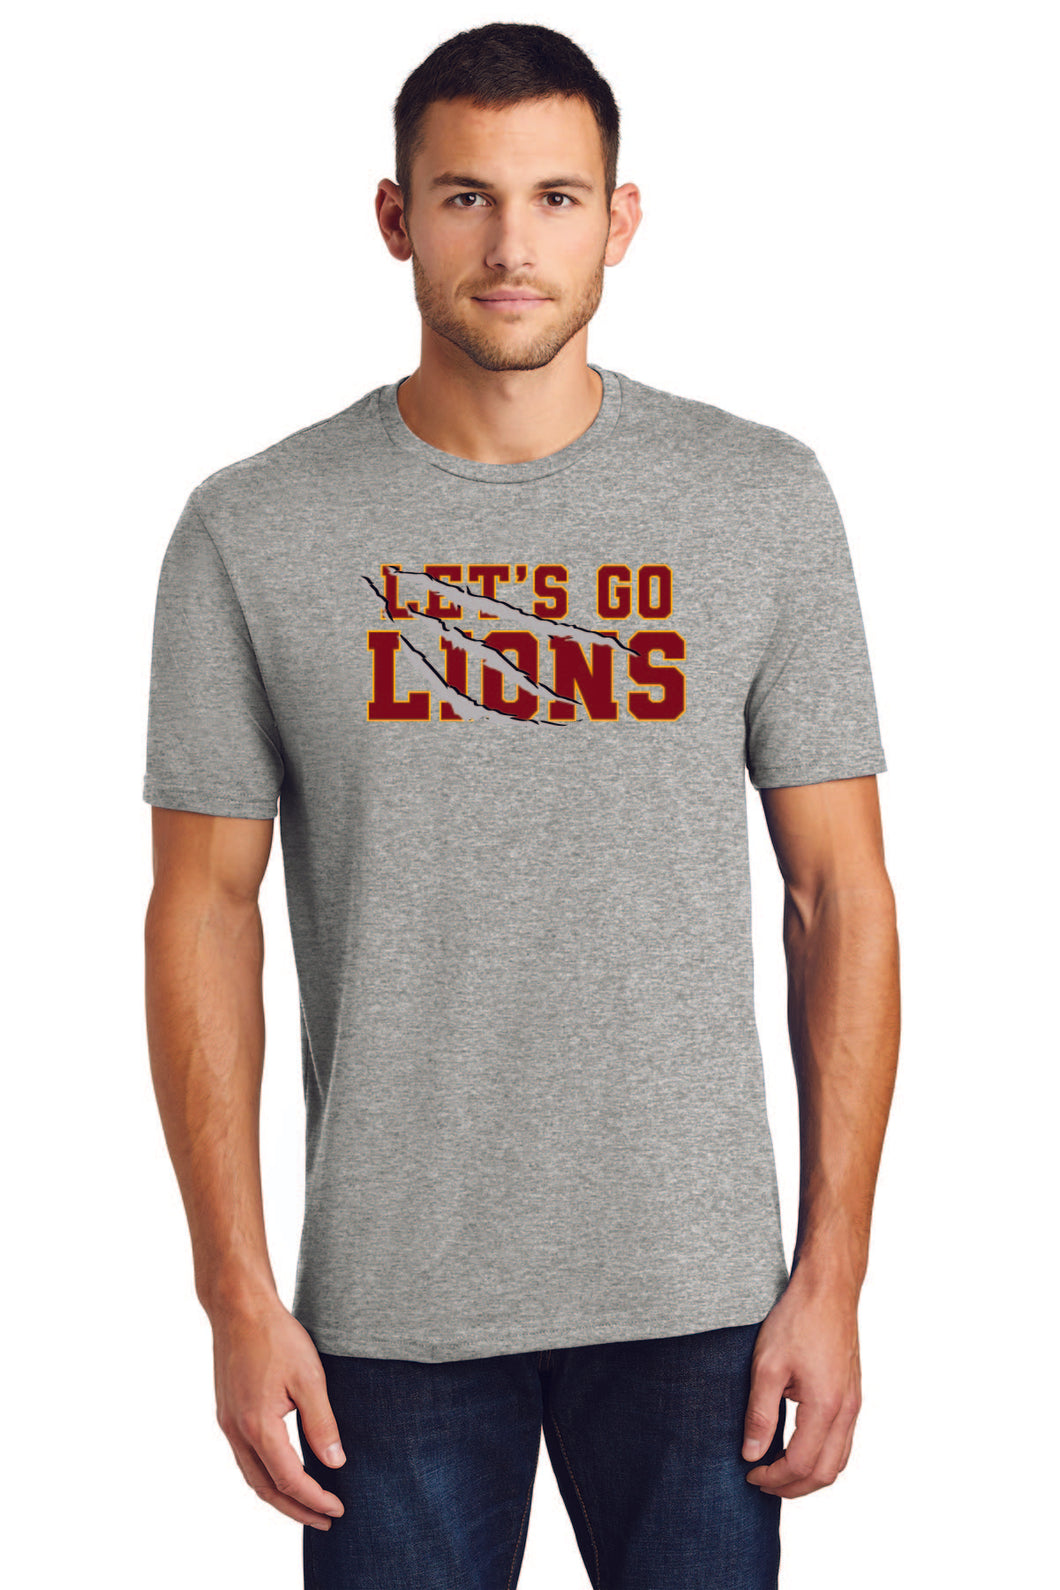 Lets Go Lions Tee